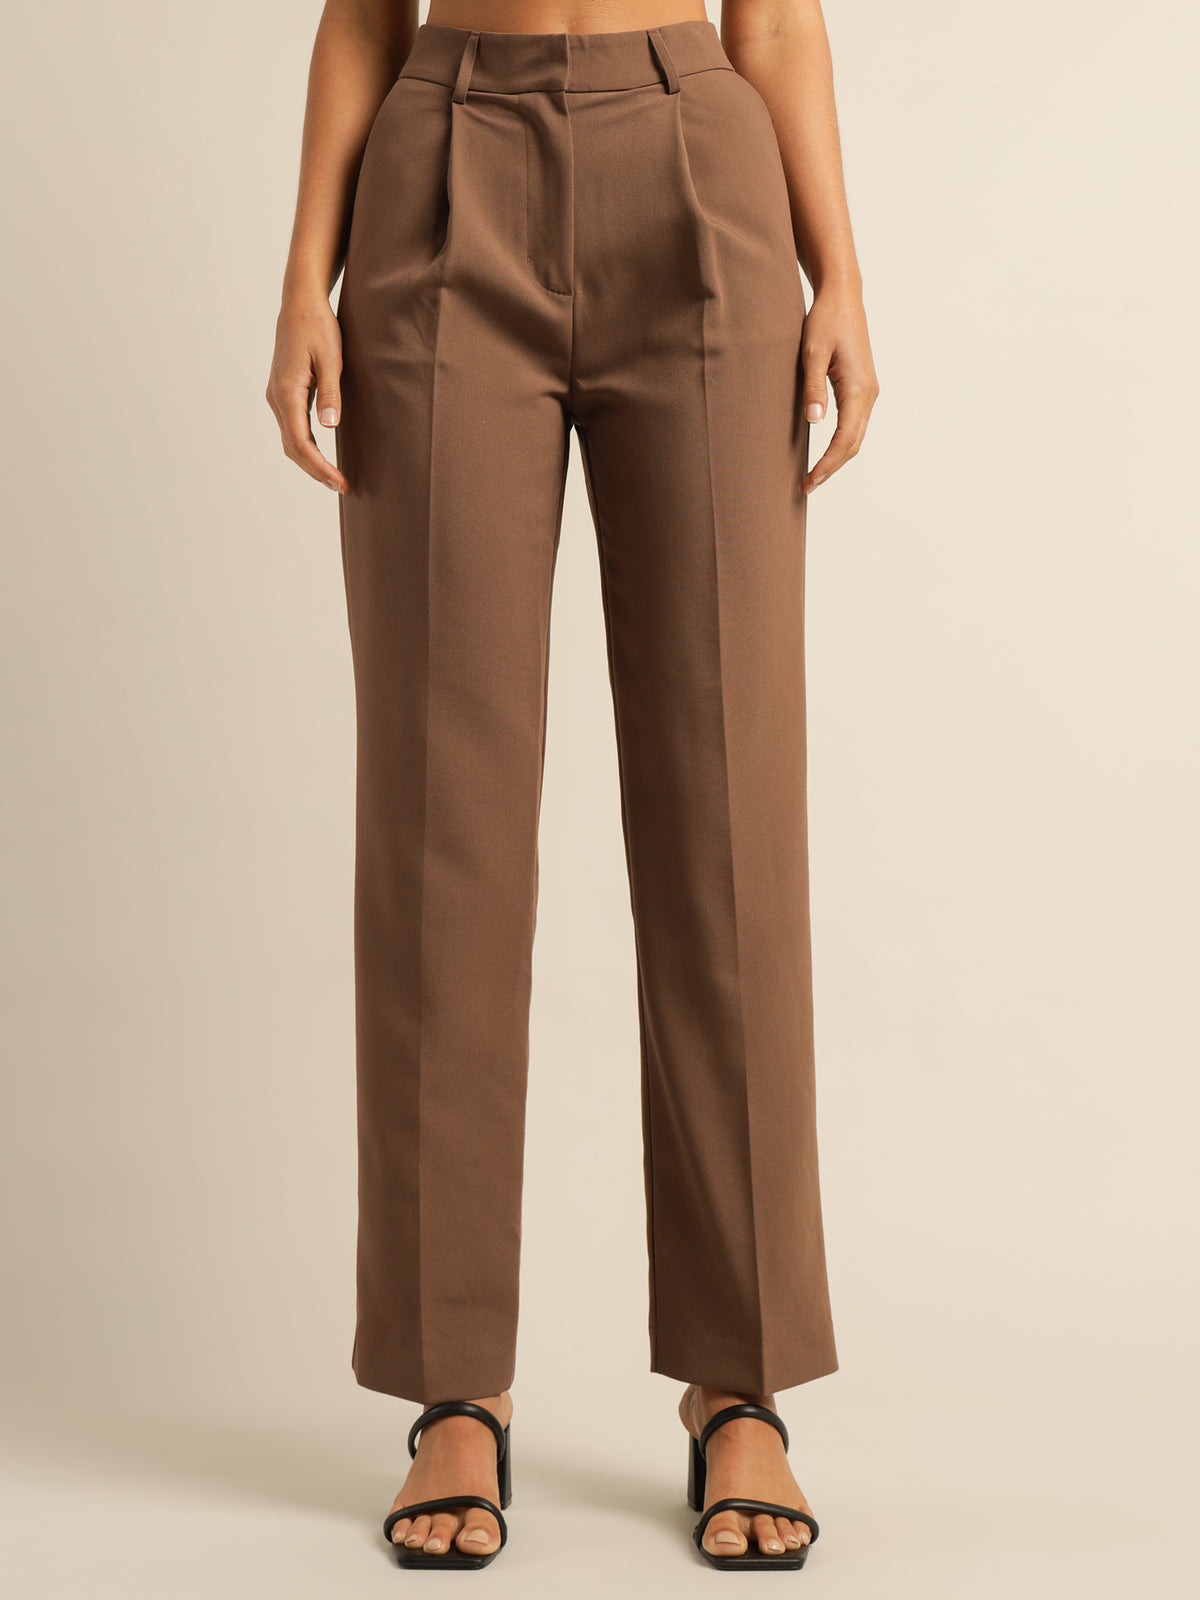 Campbell Pants in Walnut